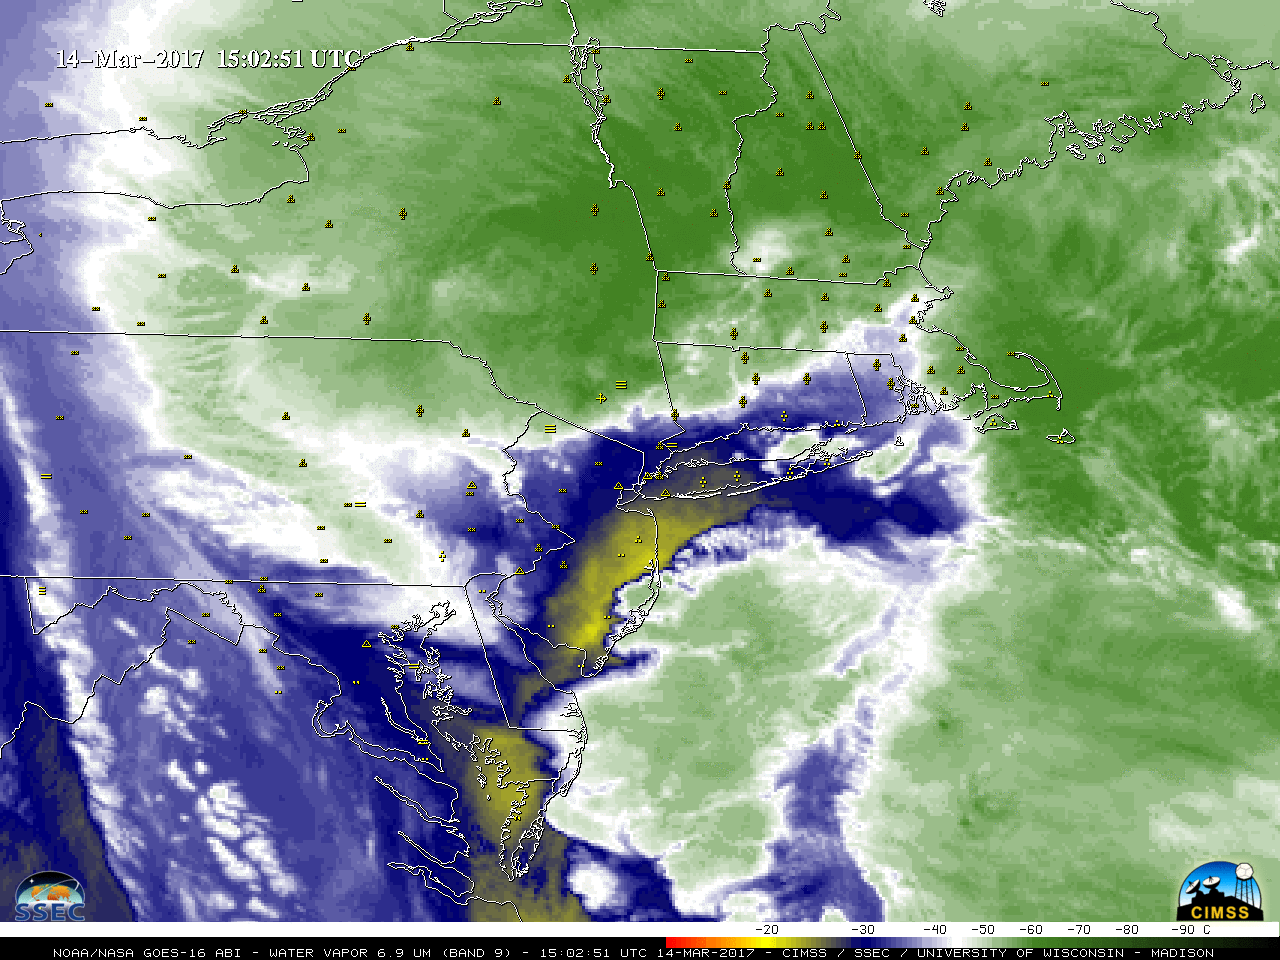 GOES-16 Water Vapor (6.9 um) images, with hourly surface weather symbols [click to play animation]